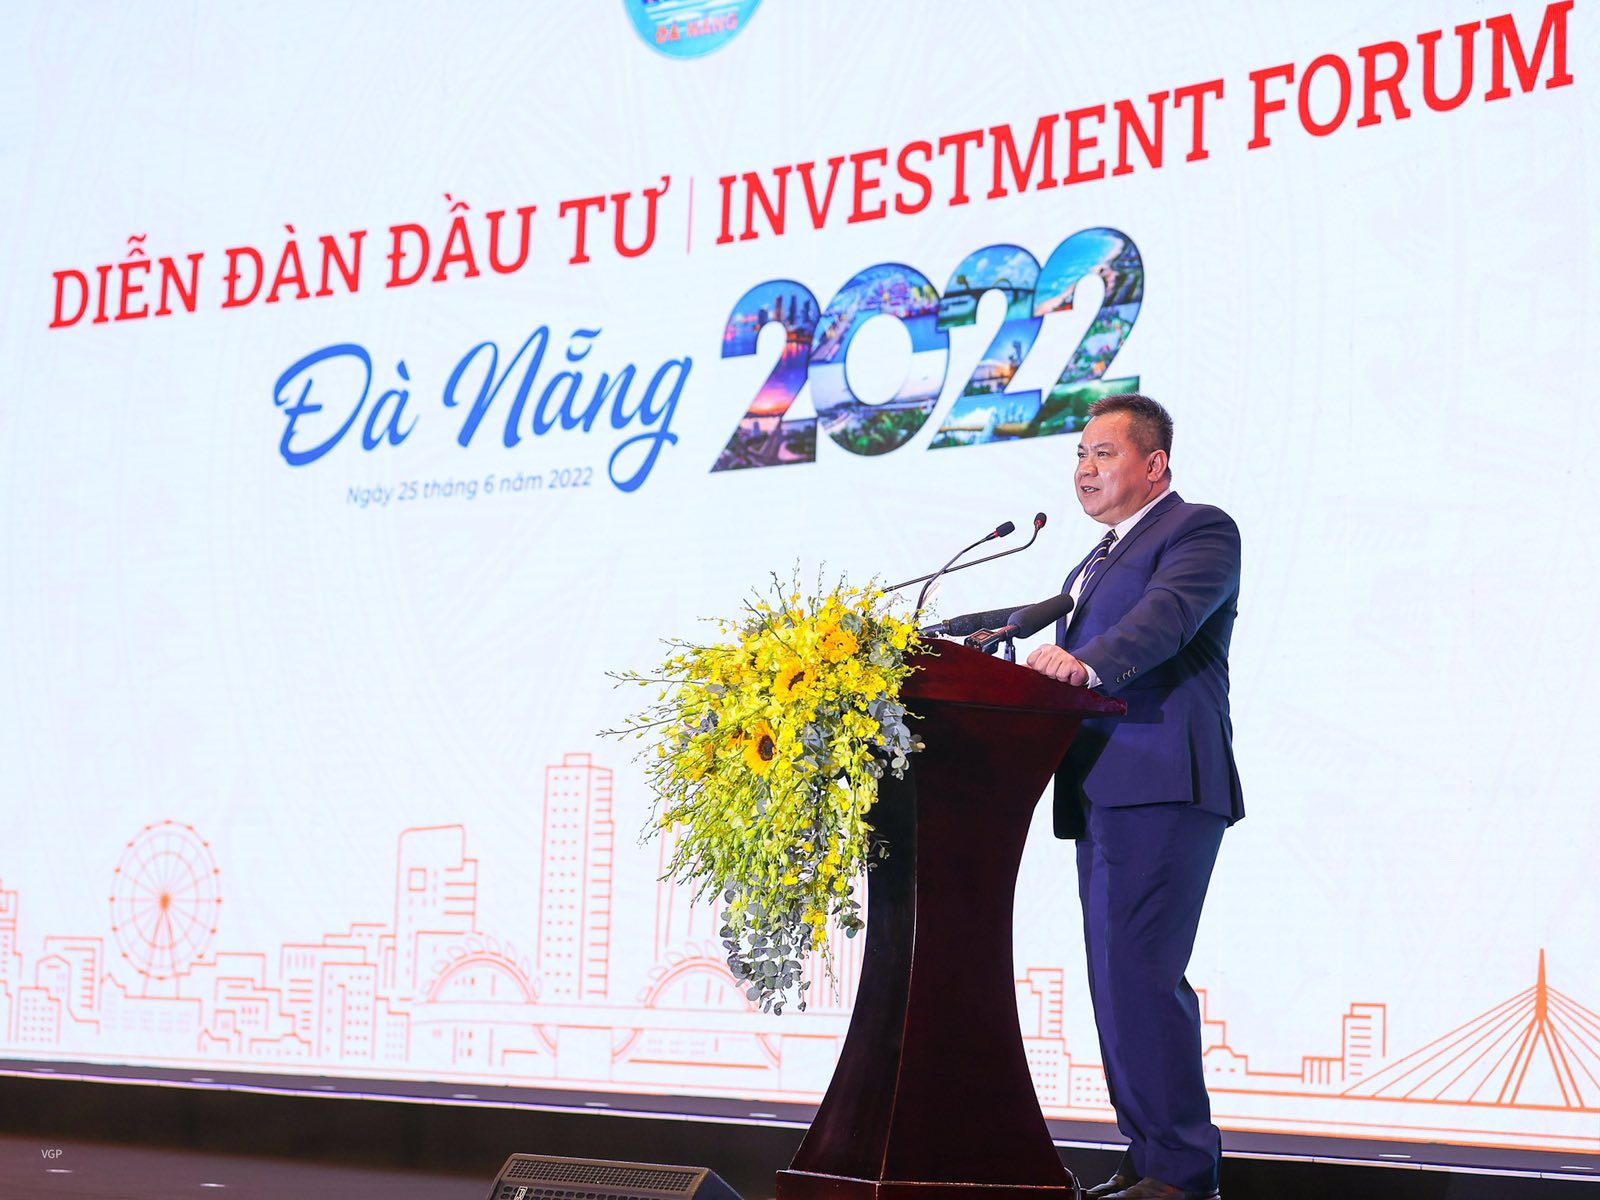 TRUONGNAM GROUP COMMITTED TO CREATE MAXIMUM CONDITIONS FOR START-UP BUSINESS IN DA NANG